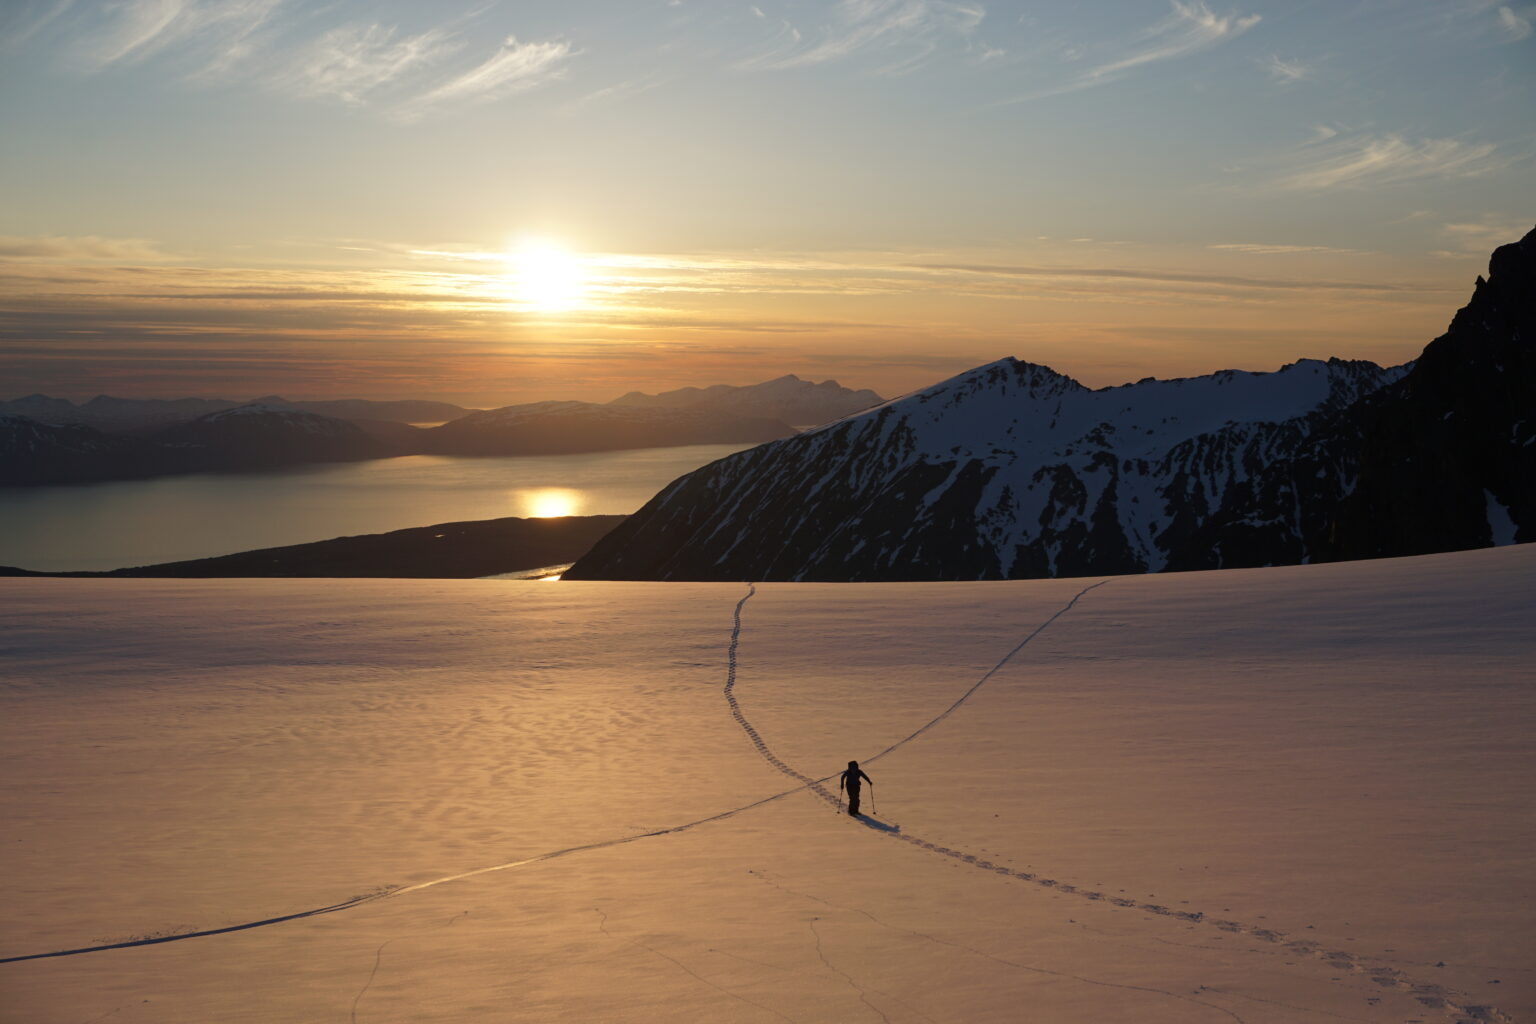 Ski touring up the Lenangsbreen Glacier in the Lyngen Alps of Norway as the Midnight sun sets to the North